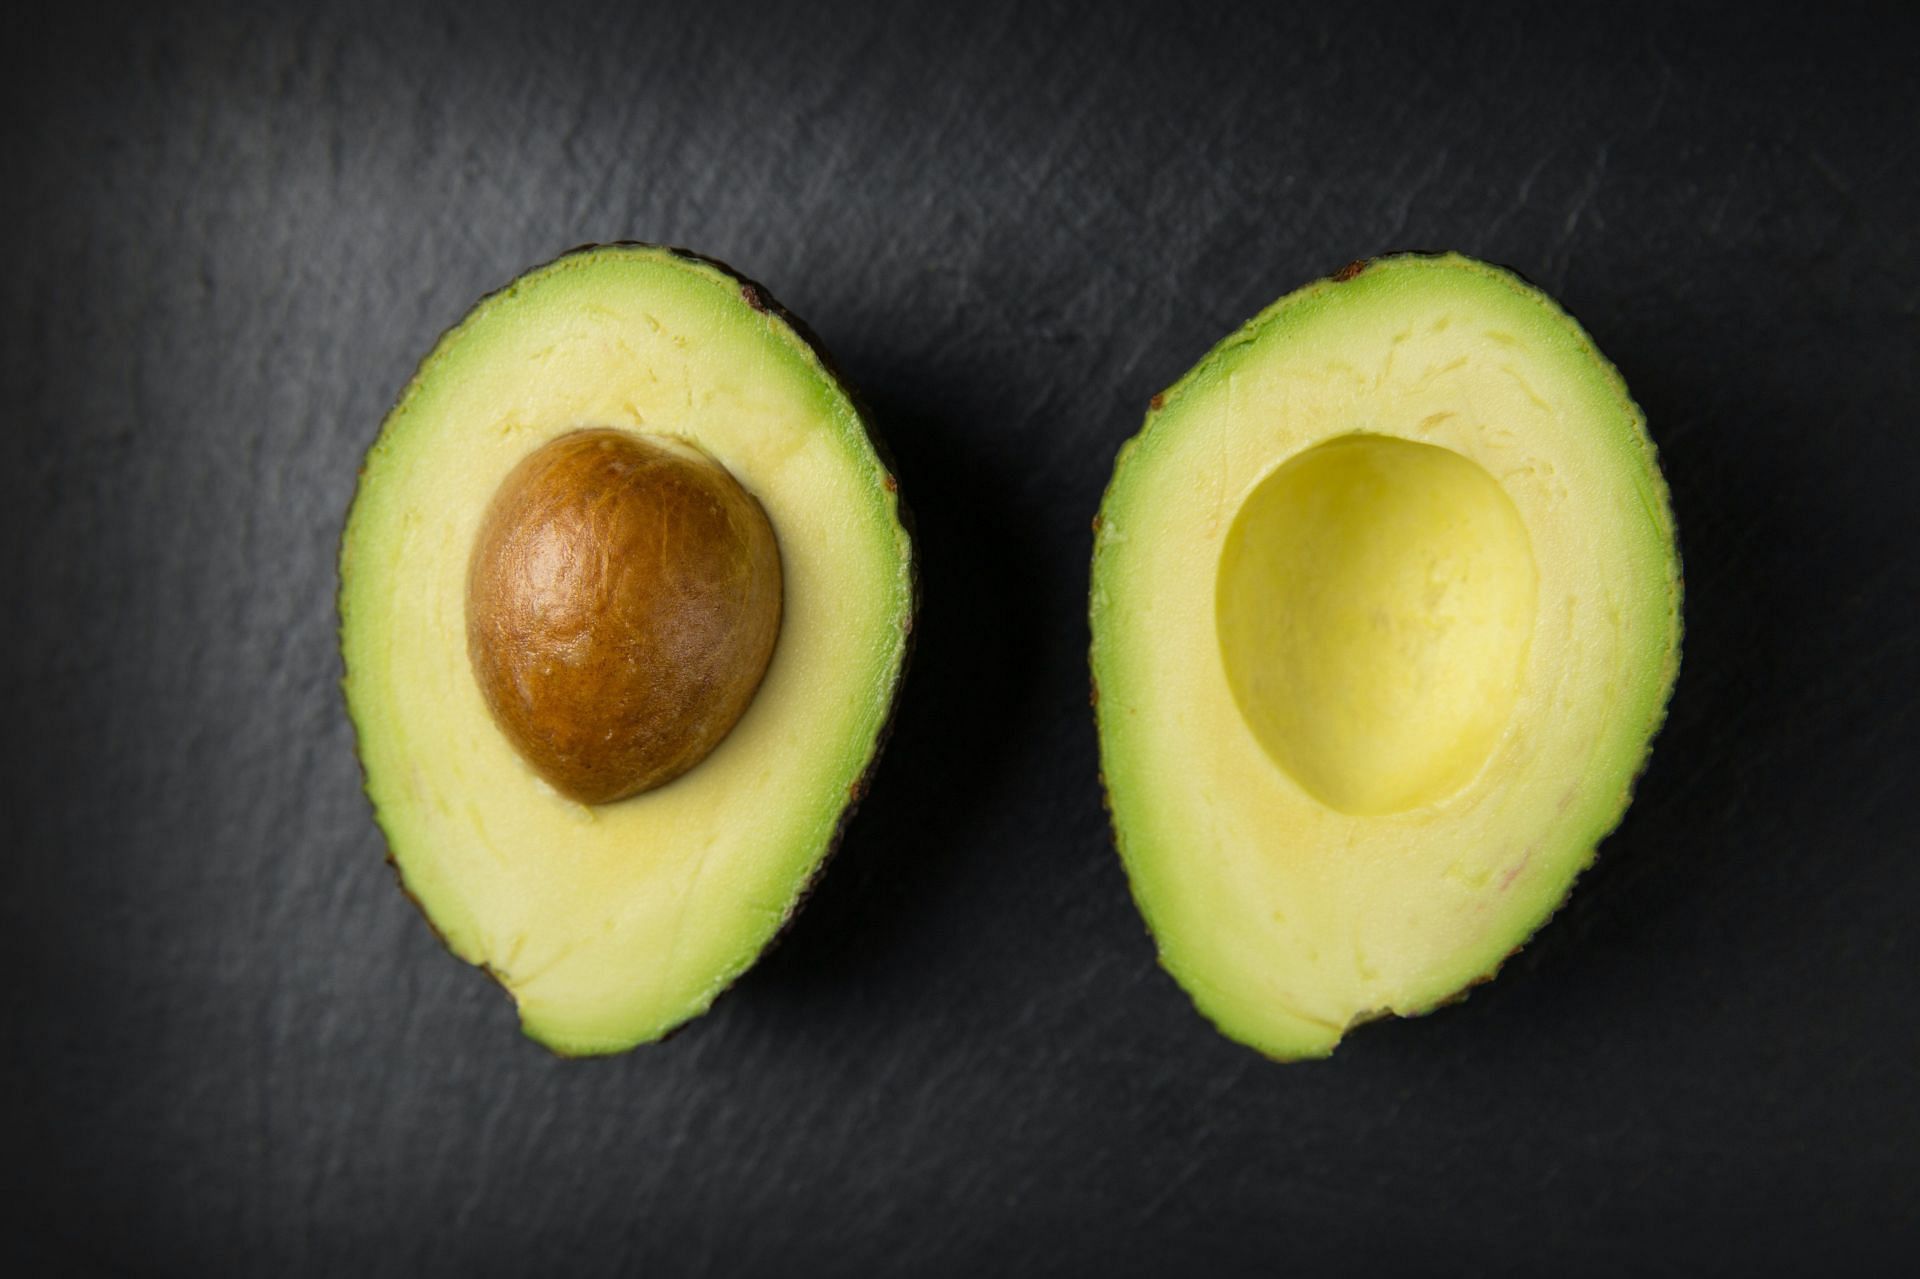 Importance of avocados as brain foods (image sourced via Pexels / Photo by foodie factor)